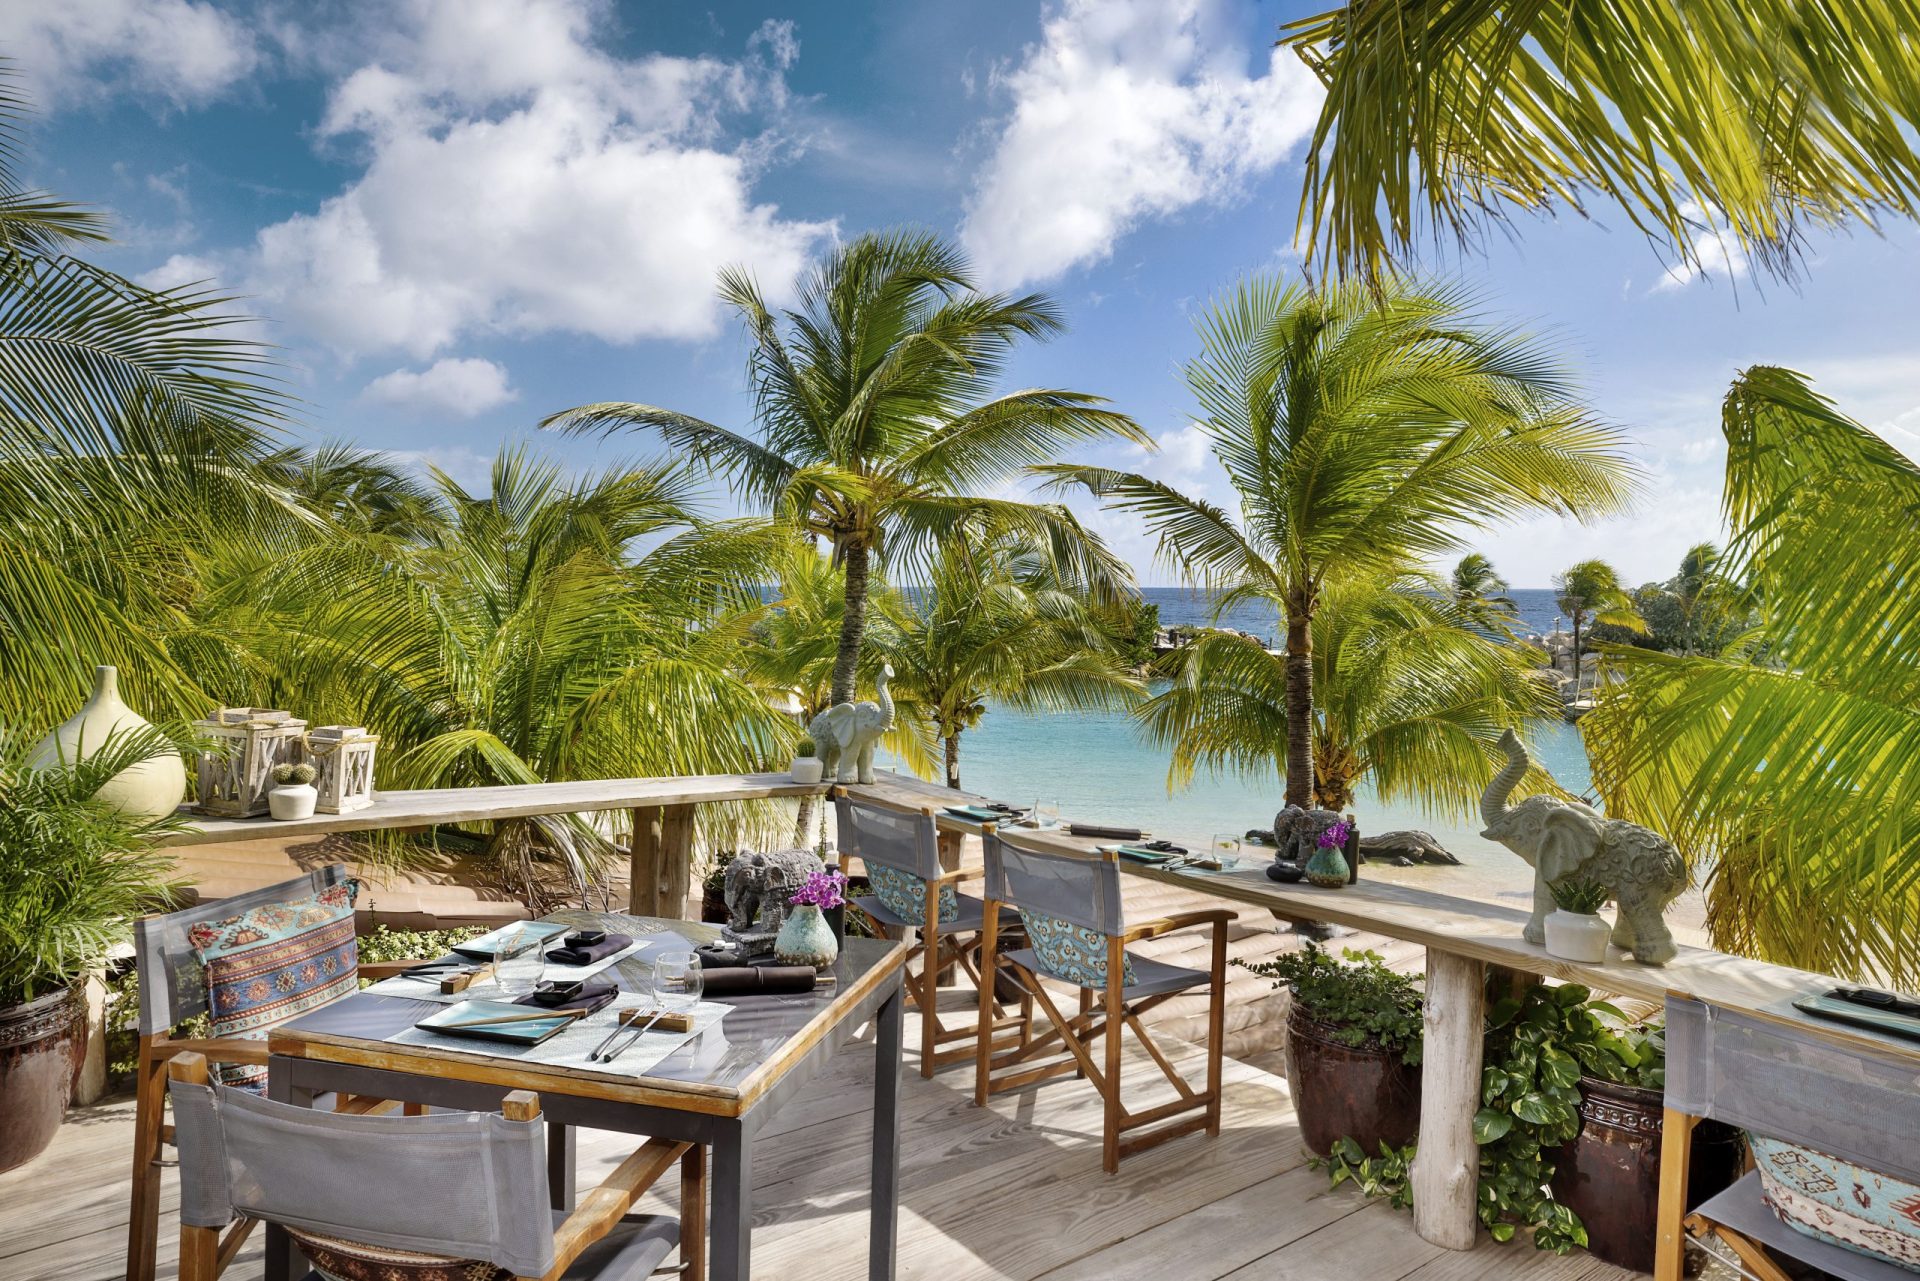 Terrace of the restaurant at Baoase with the beach, palm trees and sea in the background